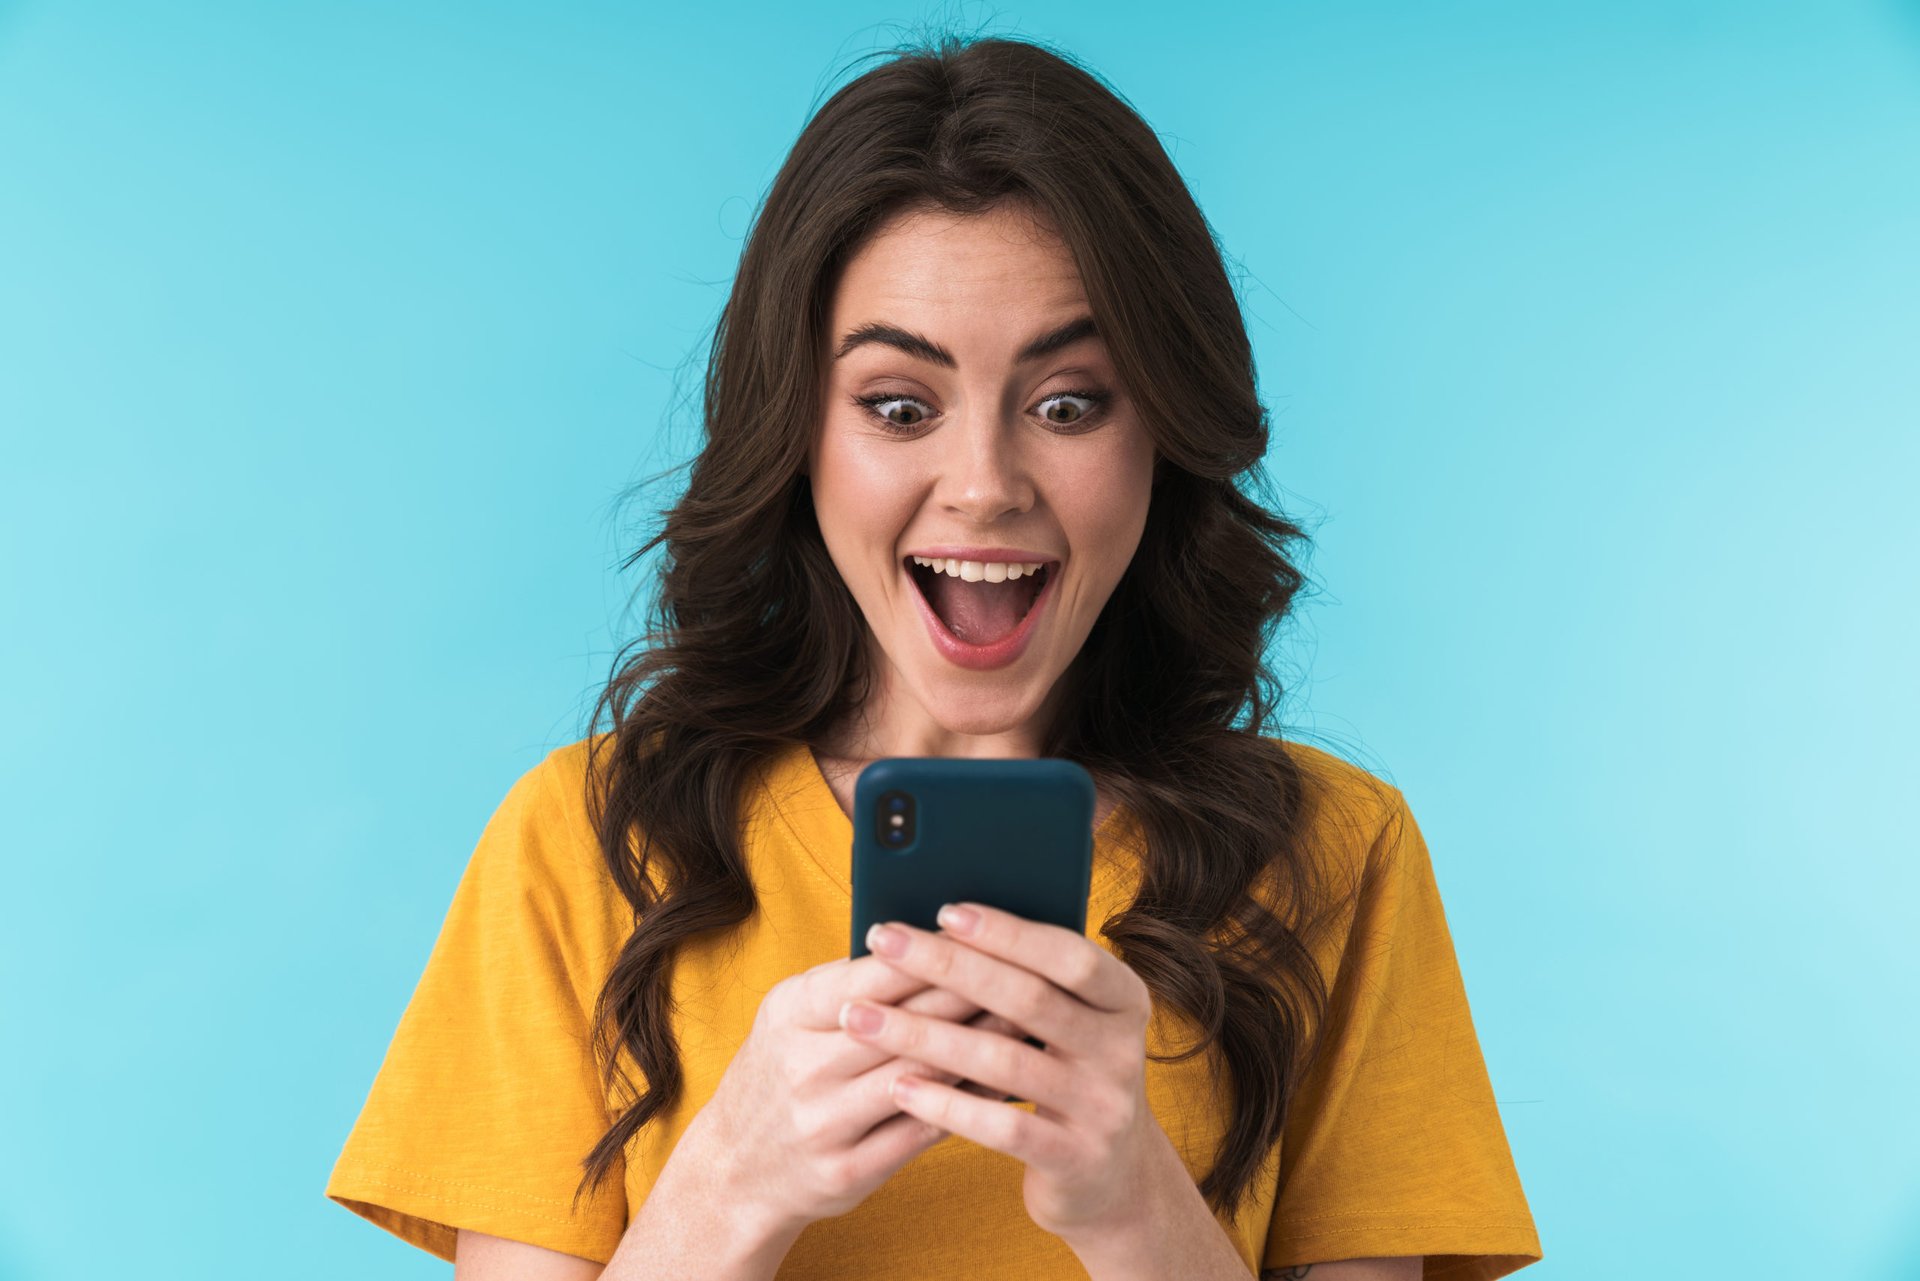 Woman excited by her low cell phone bill